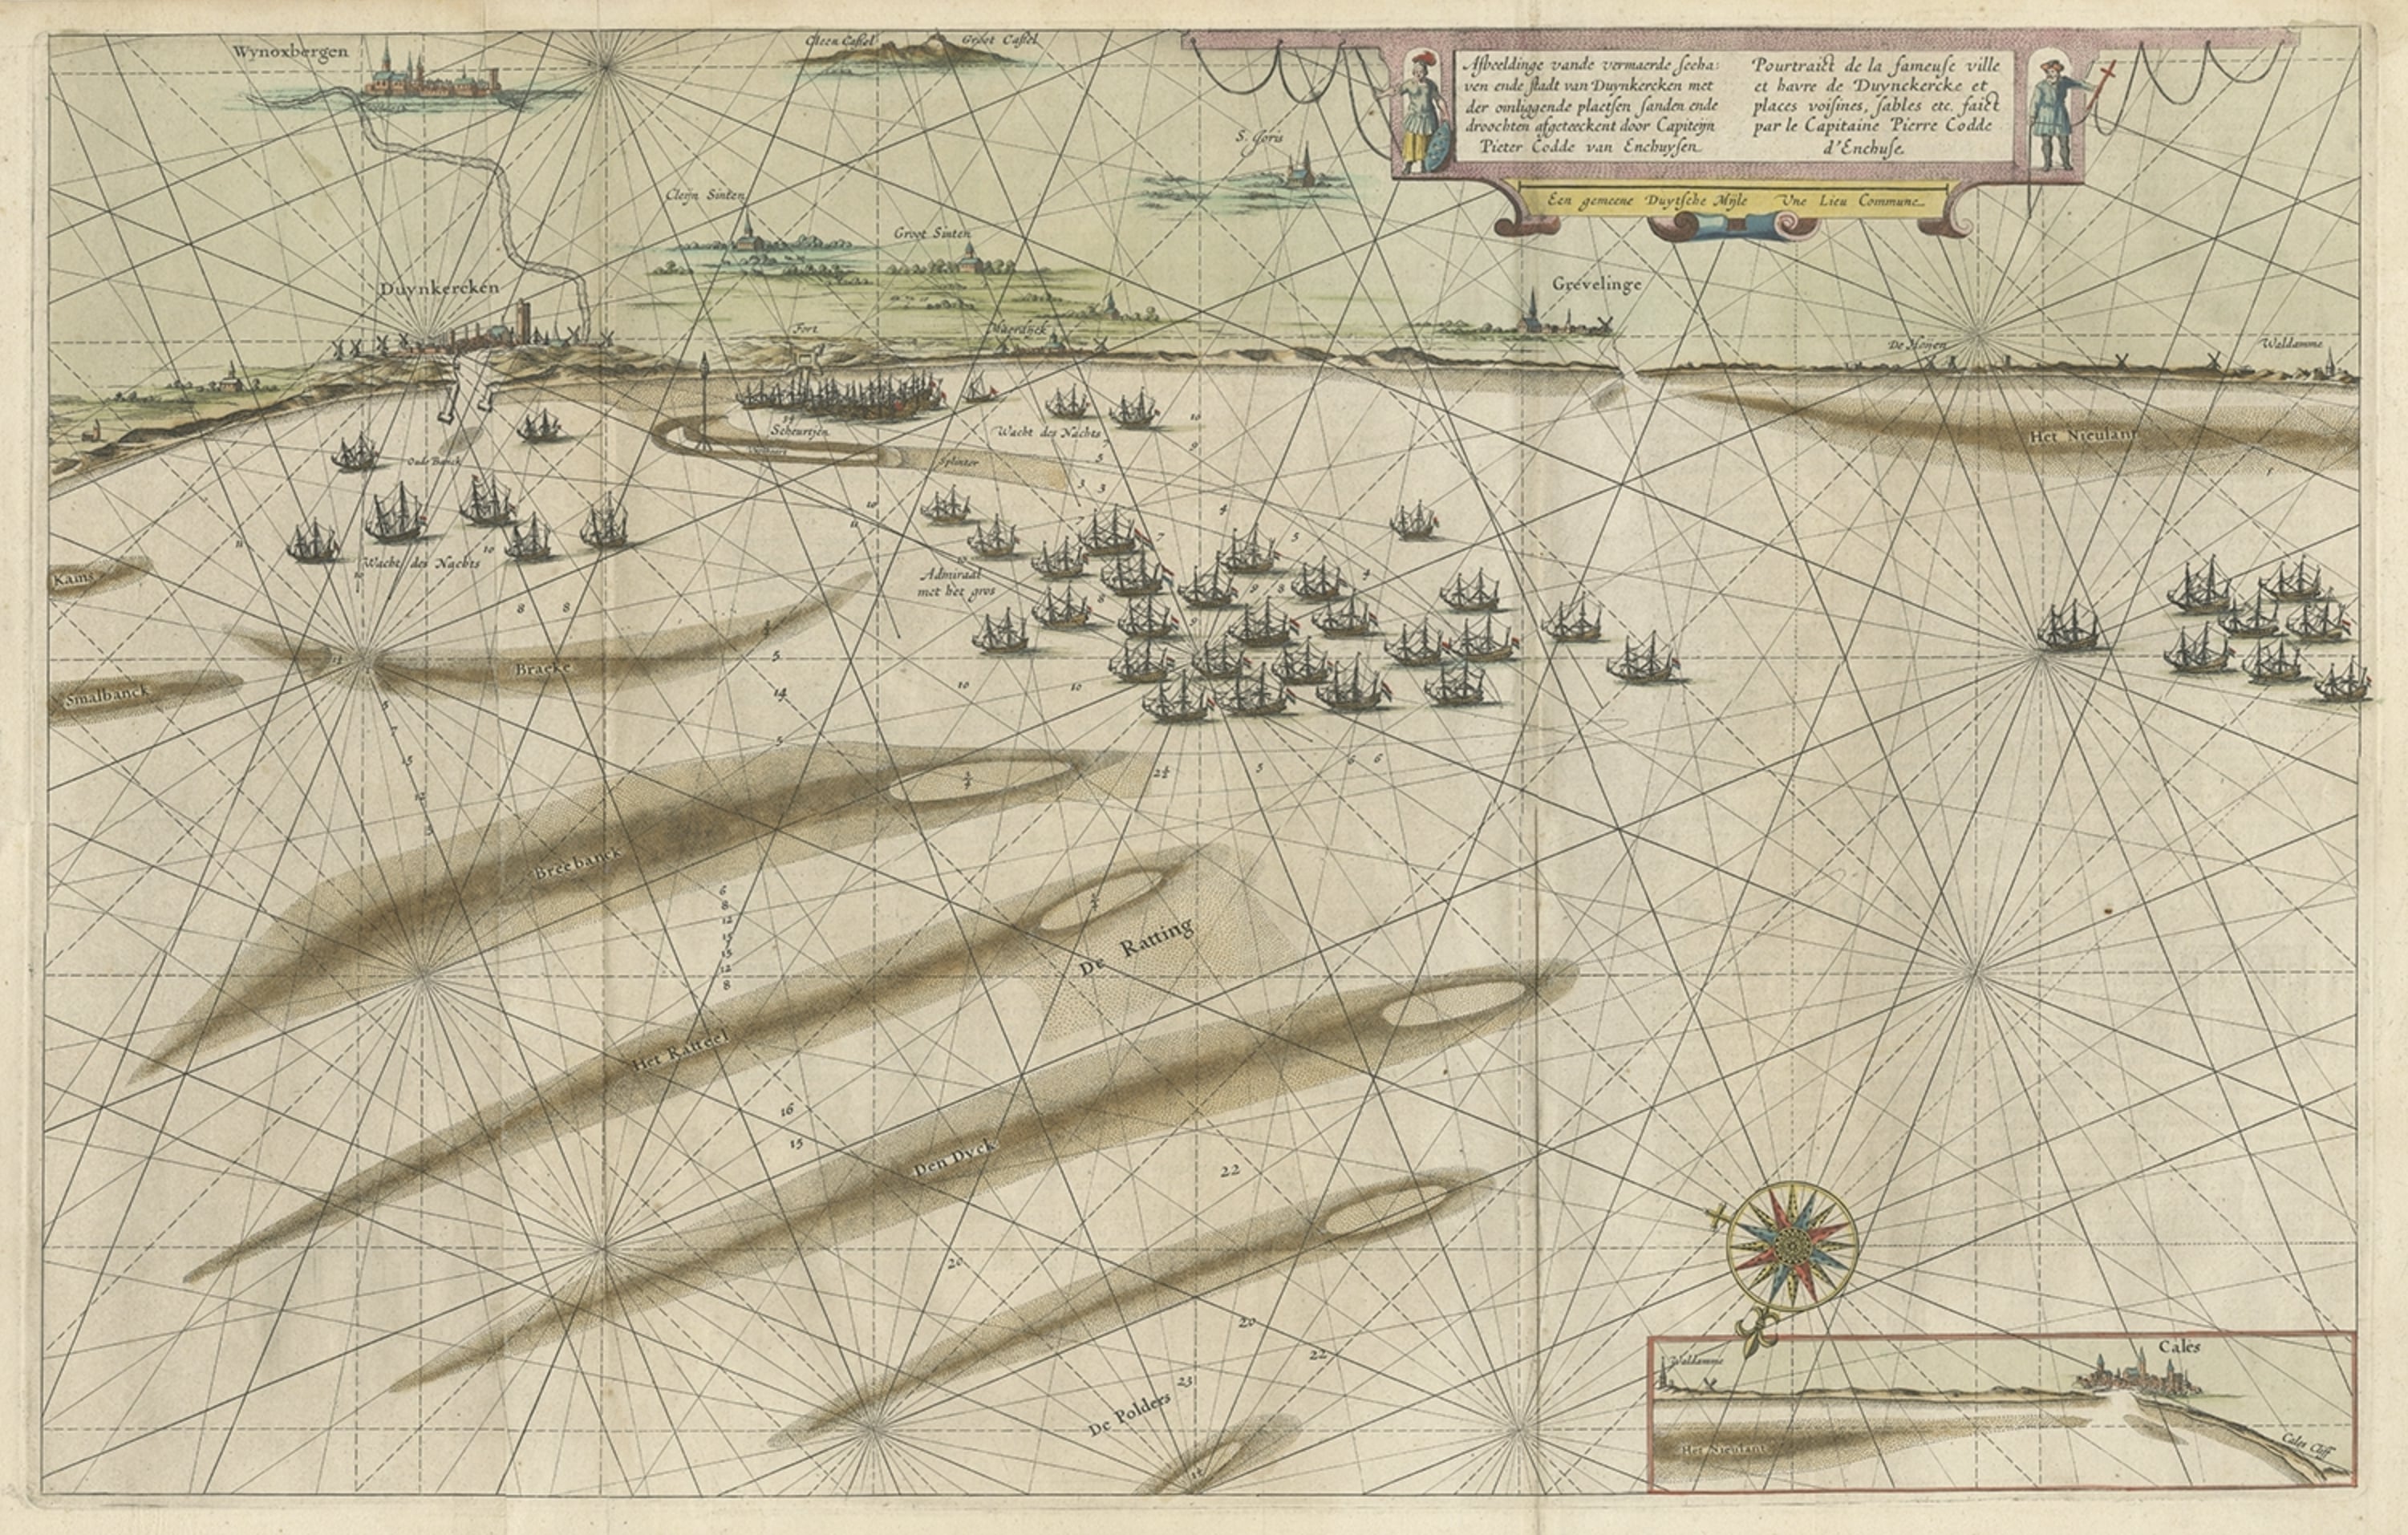 Antique Coastal Chart of The Region of Dunkerque by Blaeu, C.1640